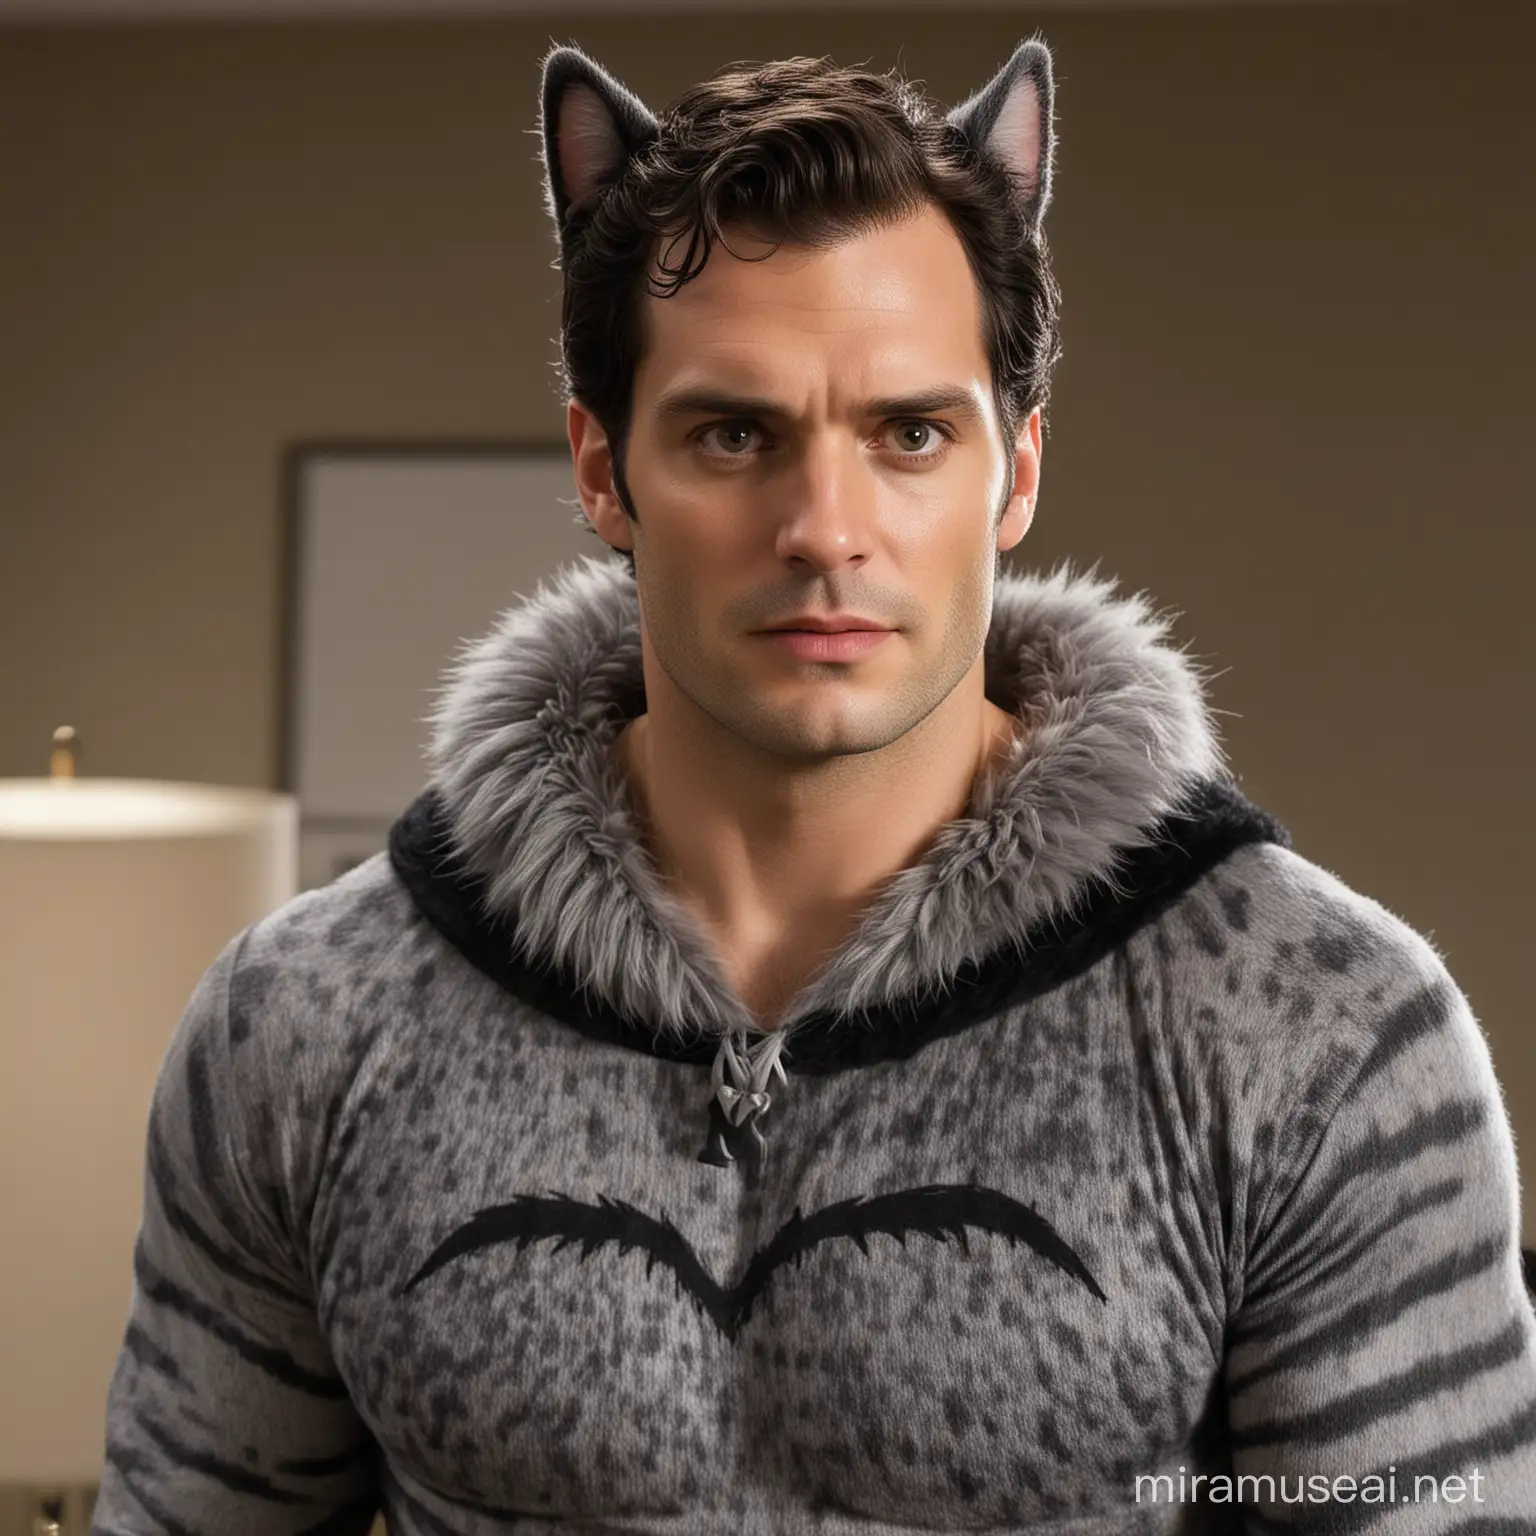 Henry Cavill Wearing Cat Costume for Playful Photoshoot